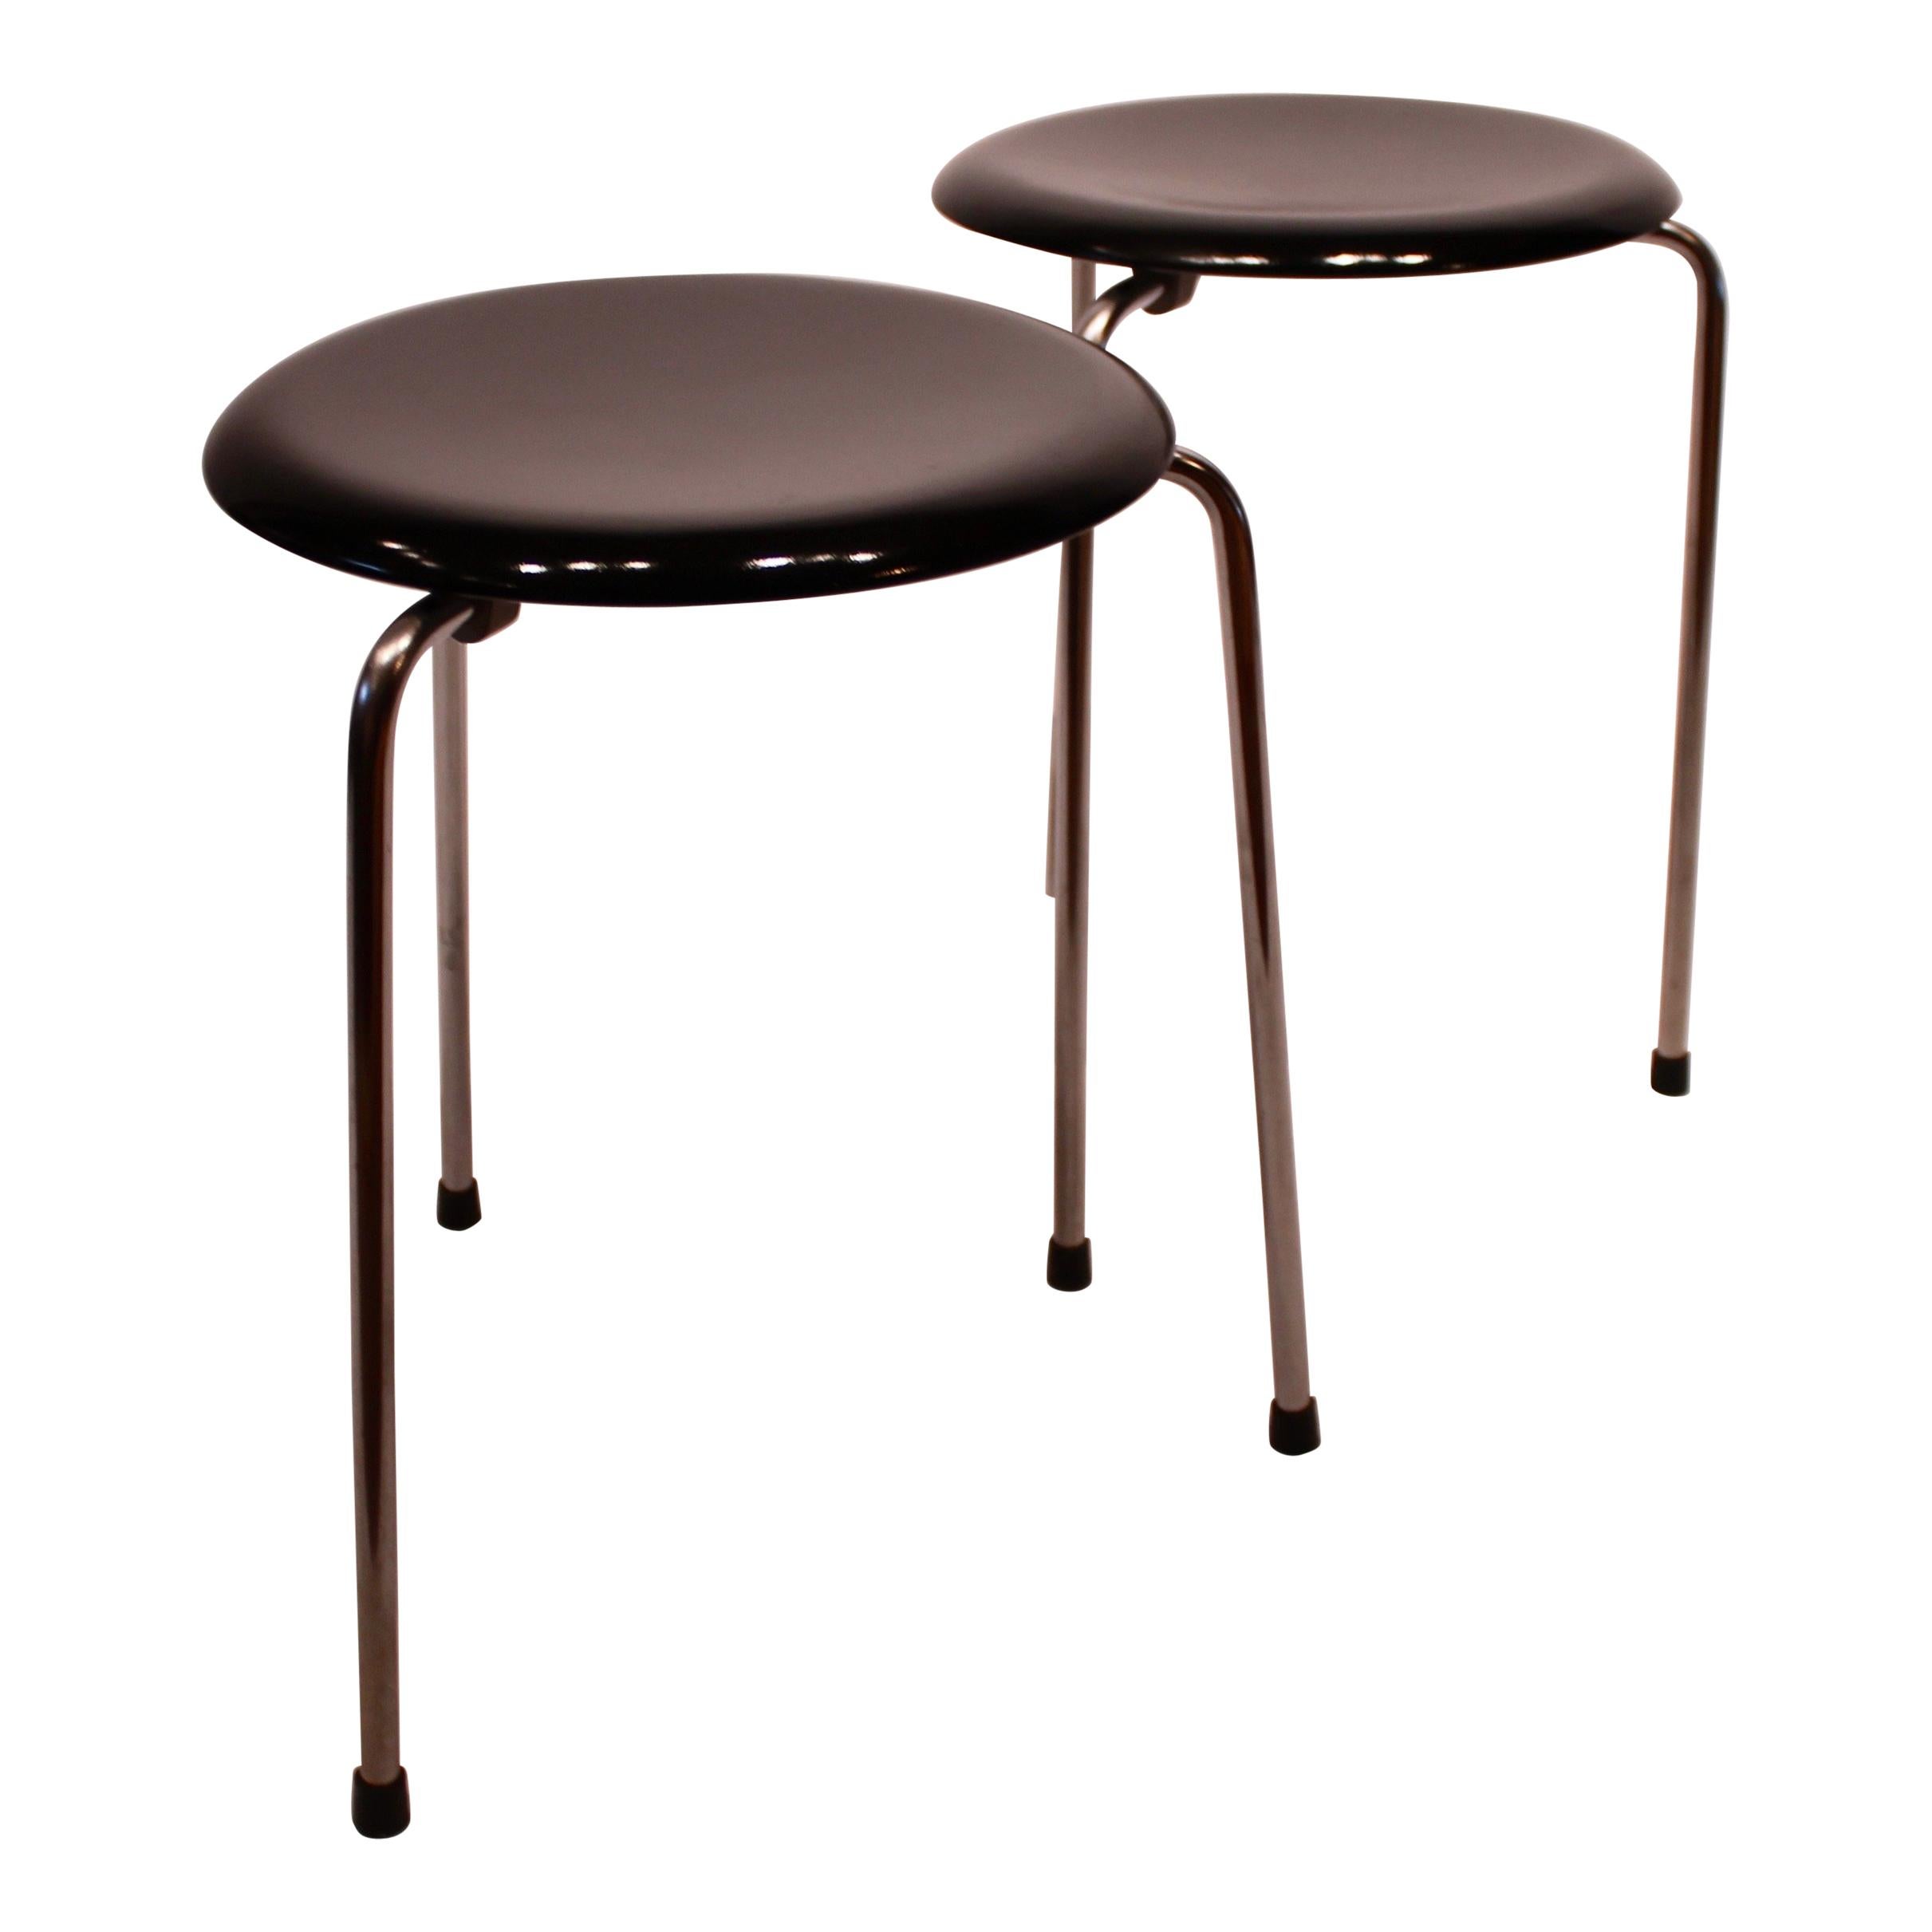 Pair of Dot Stools in Black by Arne Jacobsen and Fritz Hansen, from 1971